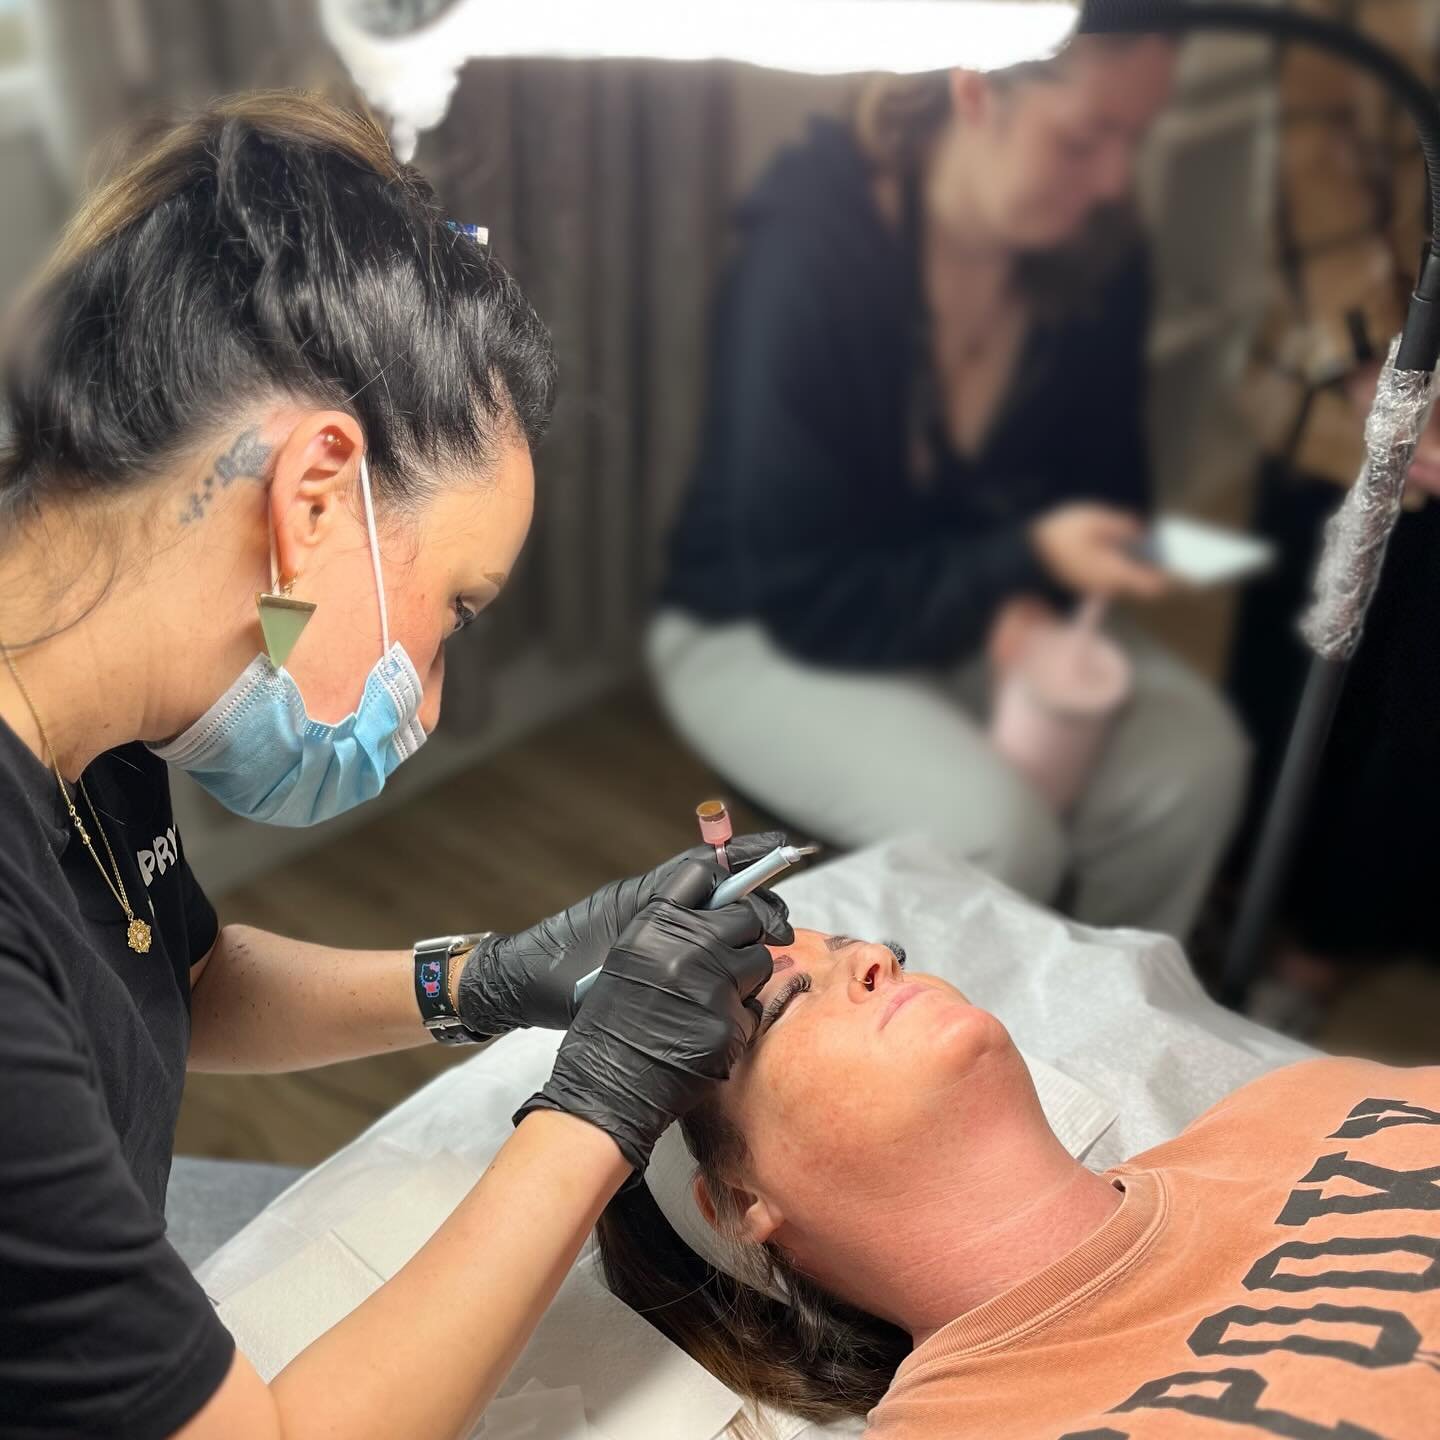 Permanent Makeup - Microblading Certification 4/19/24-5/5/24 It was a long few weeks but we made it! We will be holding more Permanent Makeup Classes in the future. Dates TBA over the coming months. This is not apart of the esthetics program. These a